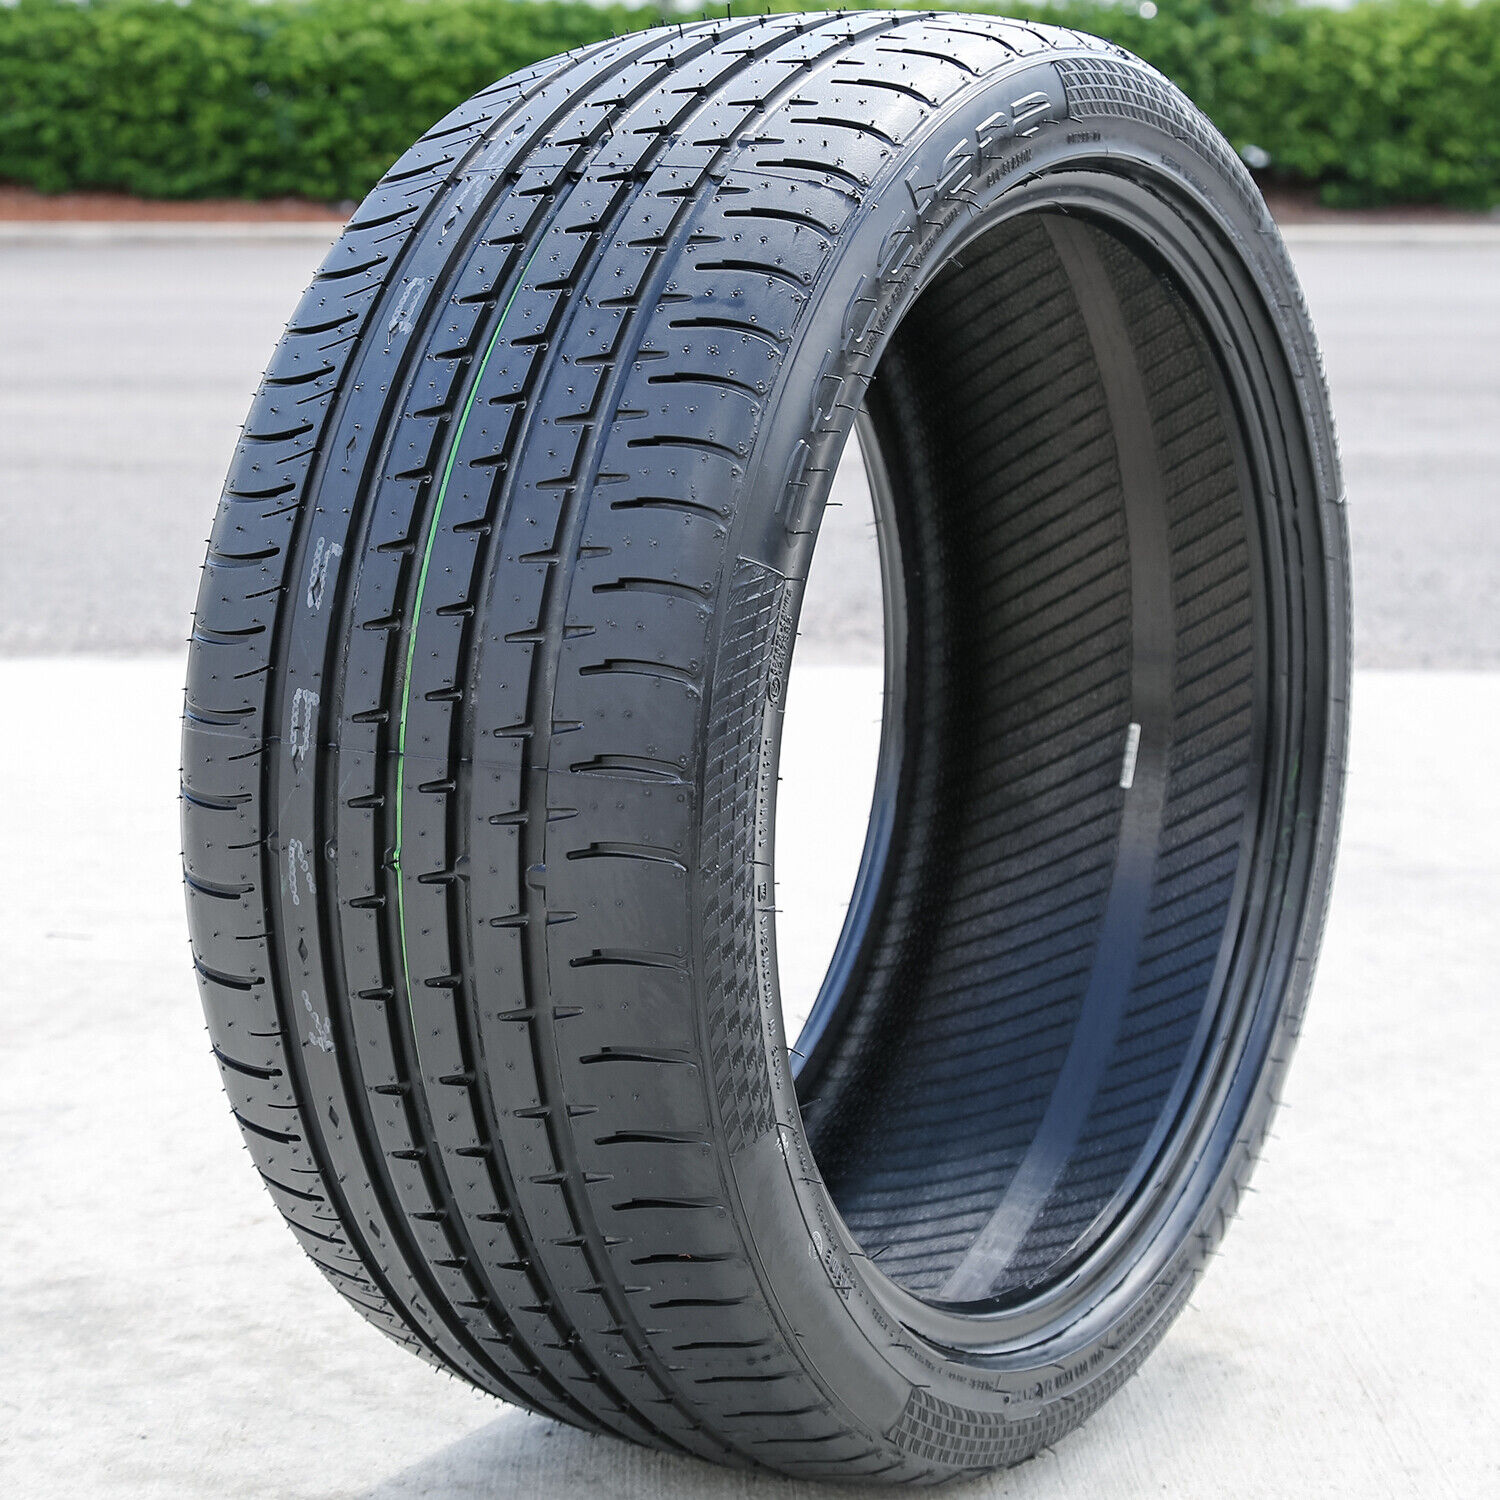 One Tire Accelera Phi 2 275/25ZR20 275/25R20 91Y XL A/S Performance